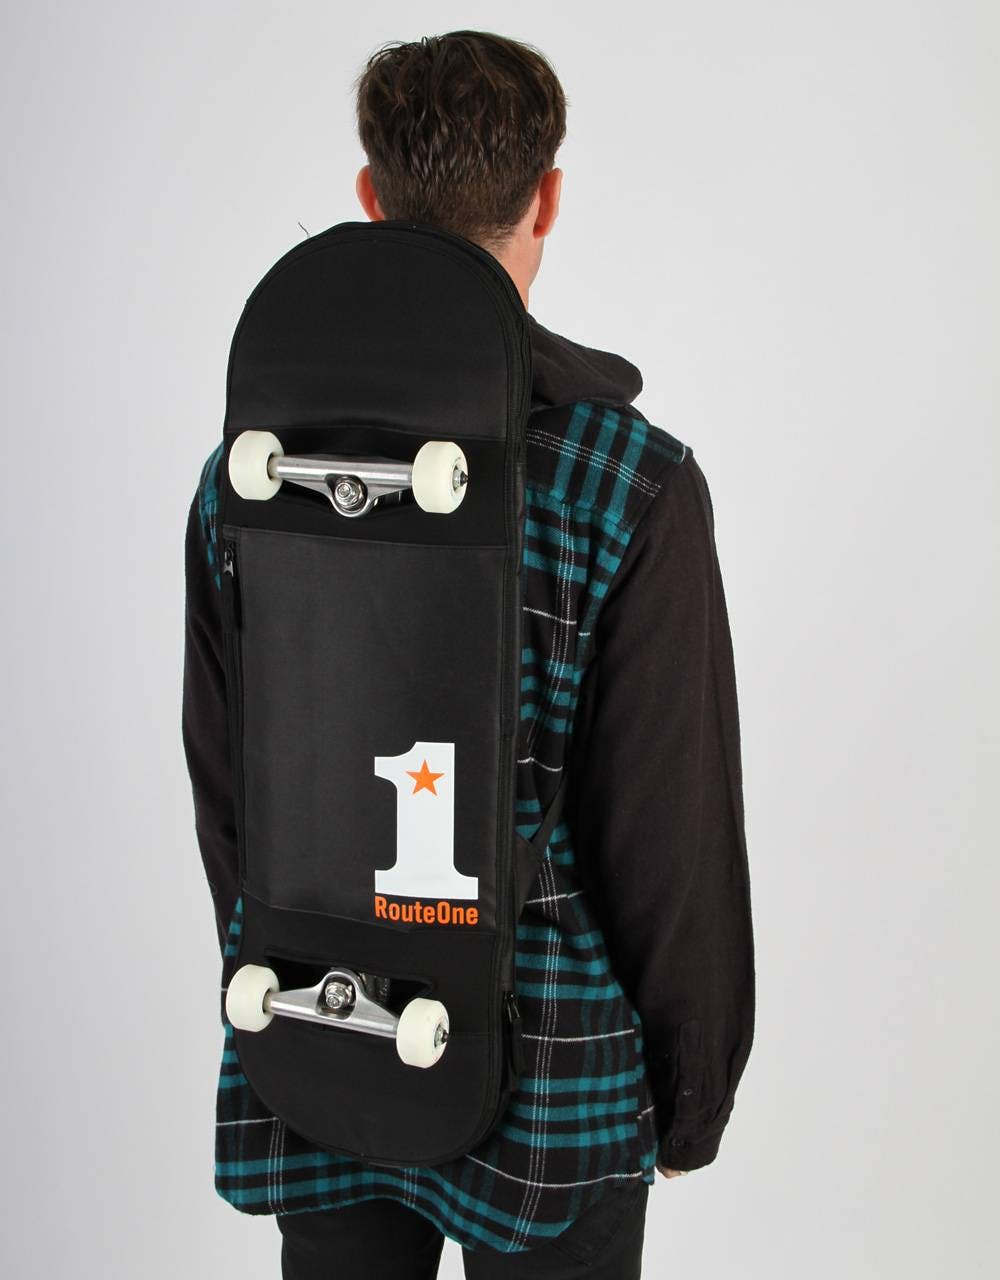 Route One Premium Skate Carrier